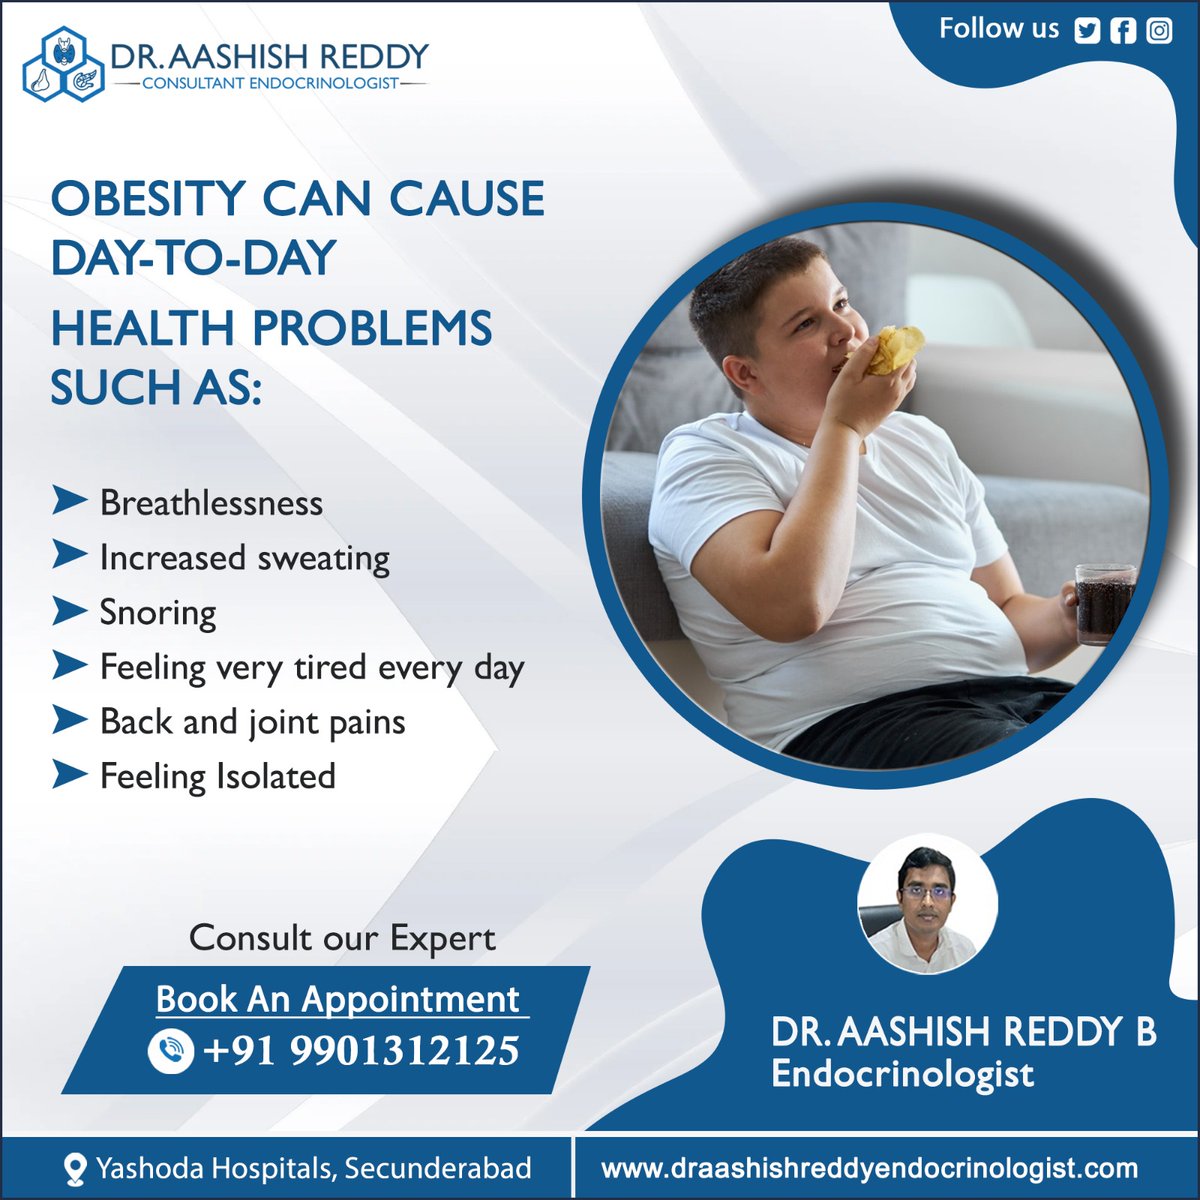 #Obesity harms daily life: #fatigue, #jointpain, #breathing issues, #heartburn, #sleepproblems, #skinirritation, #highbloodpressure, #diabetes. Prioritize health!

For More Visit:
draashishreddyendocrinologist.com